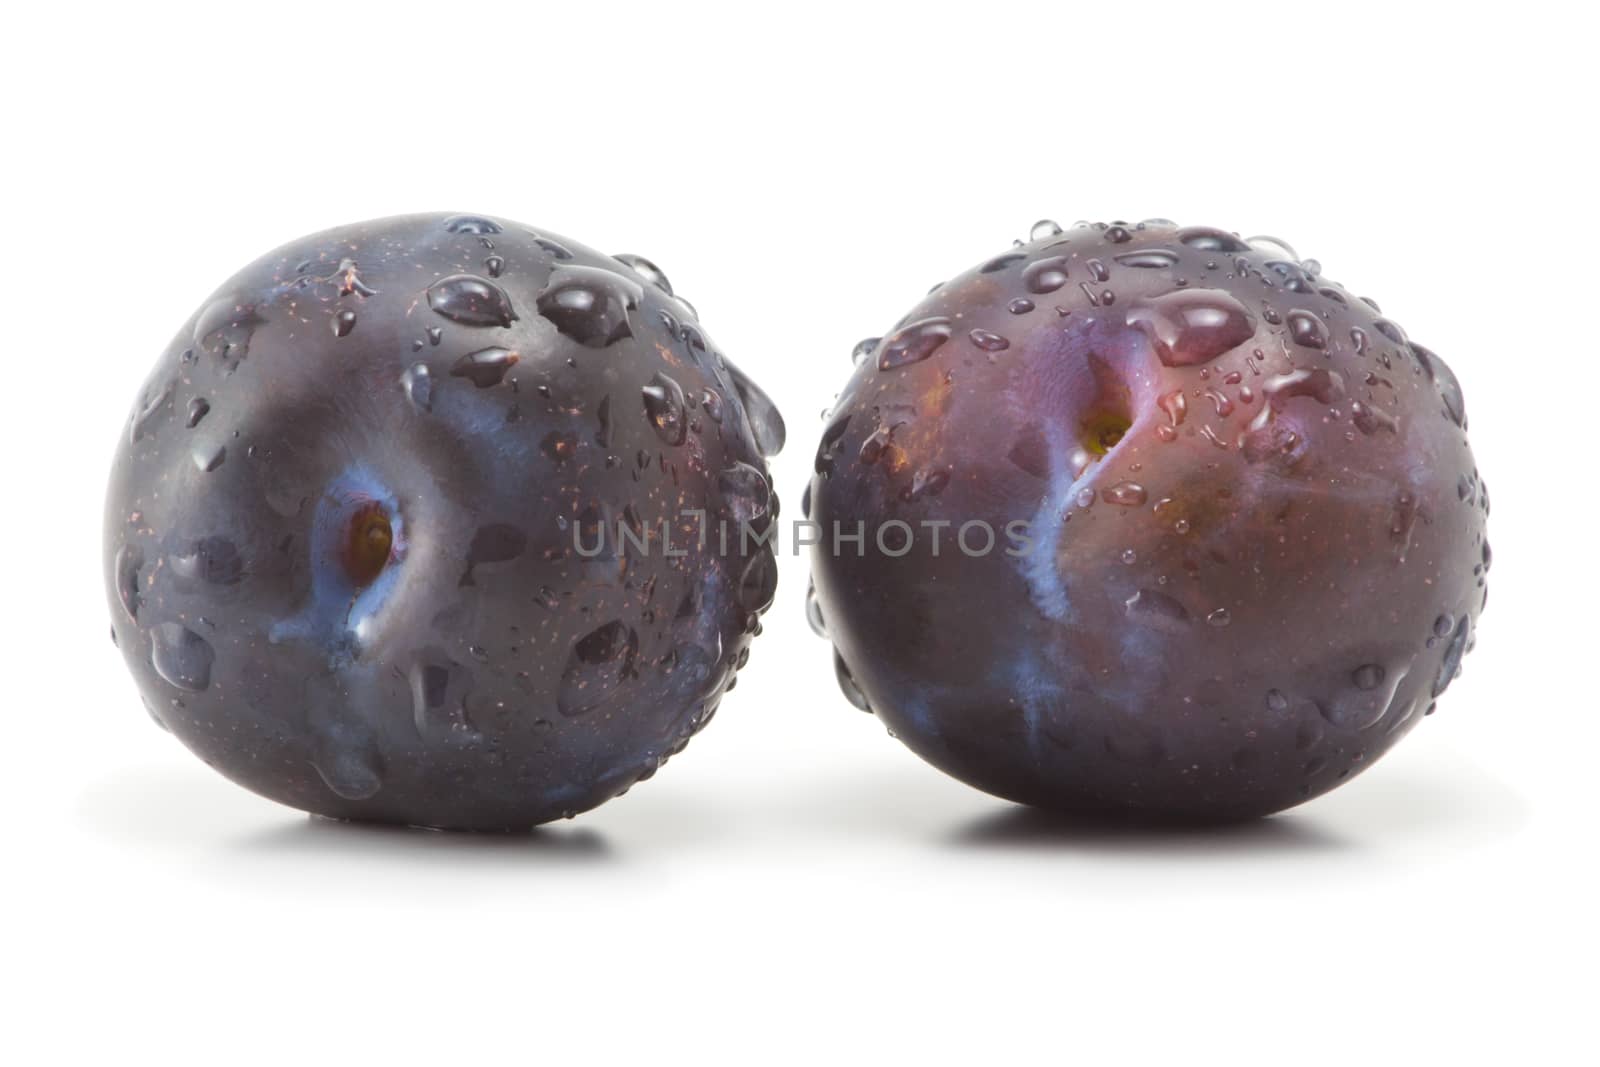 Two plums with drops of water on a white background